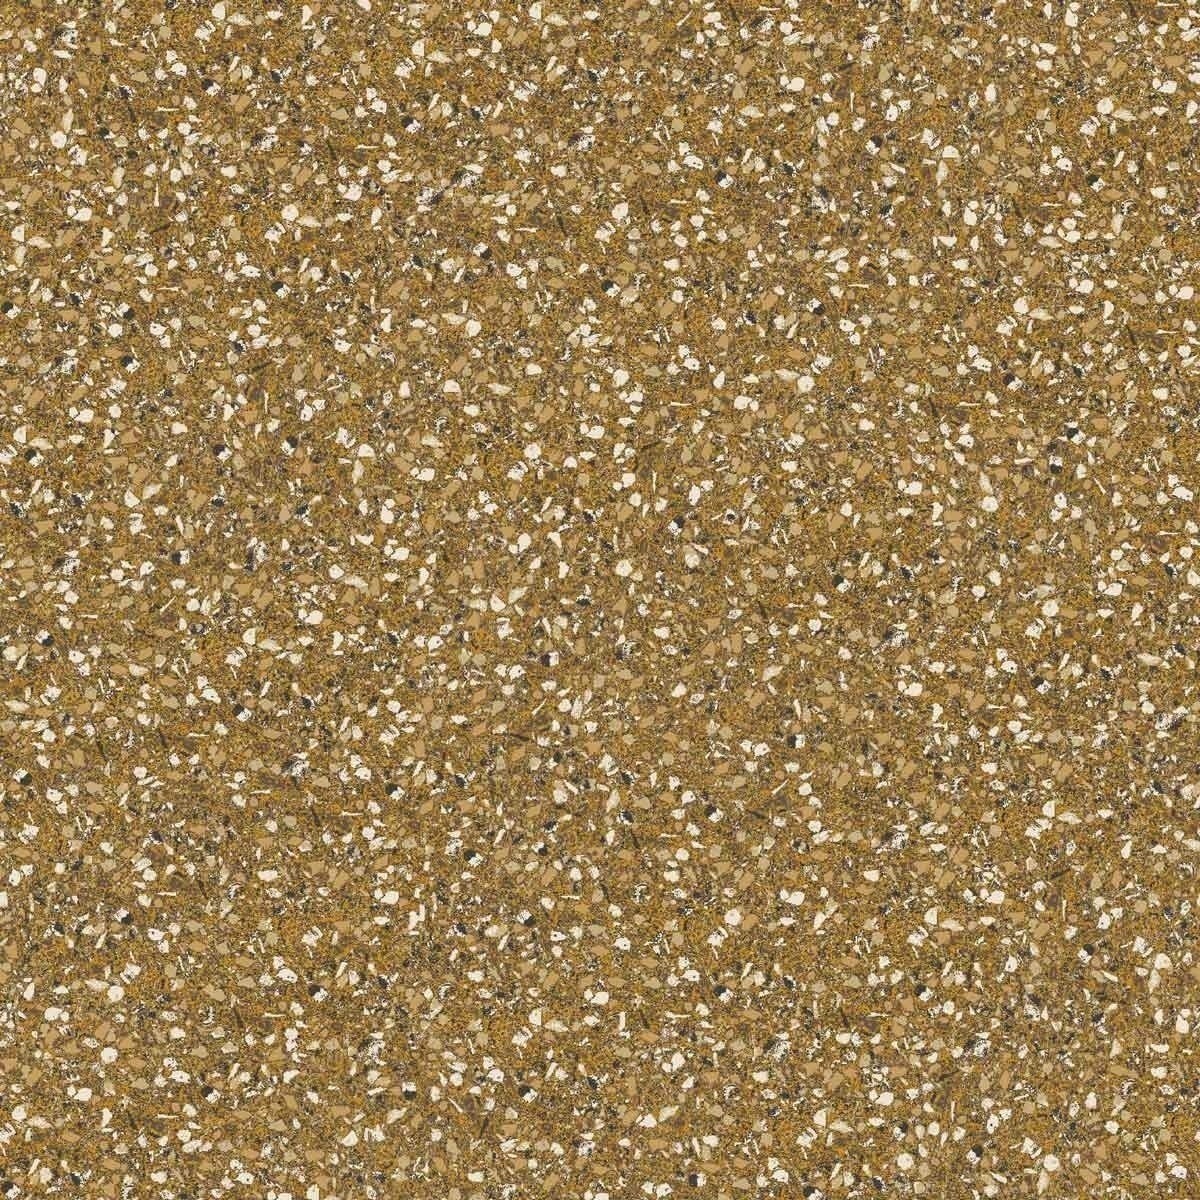 VATIN Glitter Metallic Gold Ribbon 5/8 inches Wide Sparkly Fabric